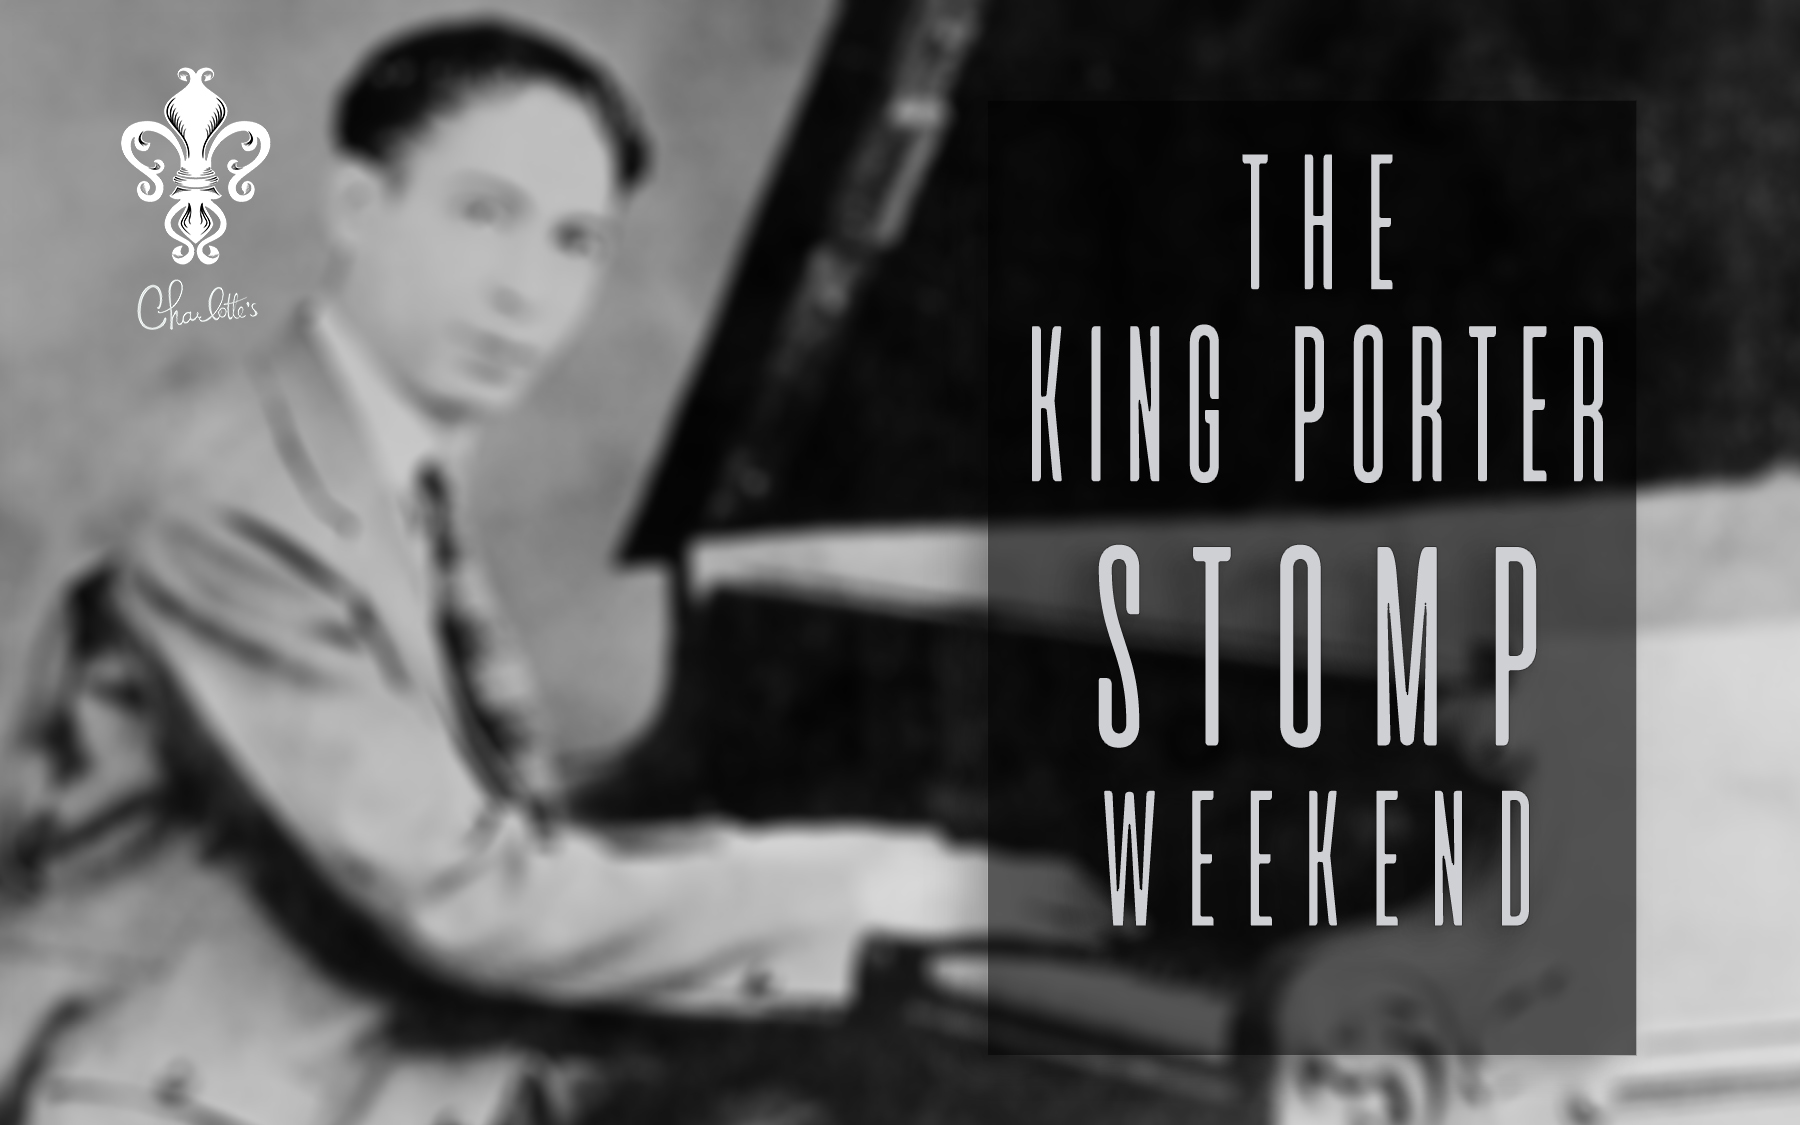 The King Porter Stomp Weekend